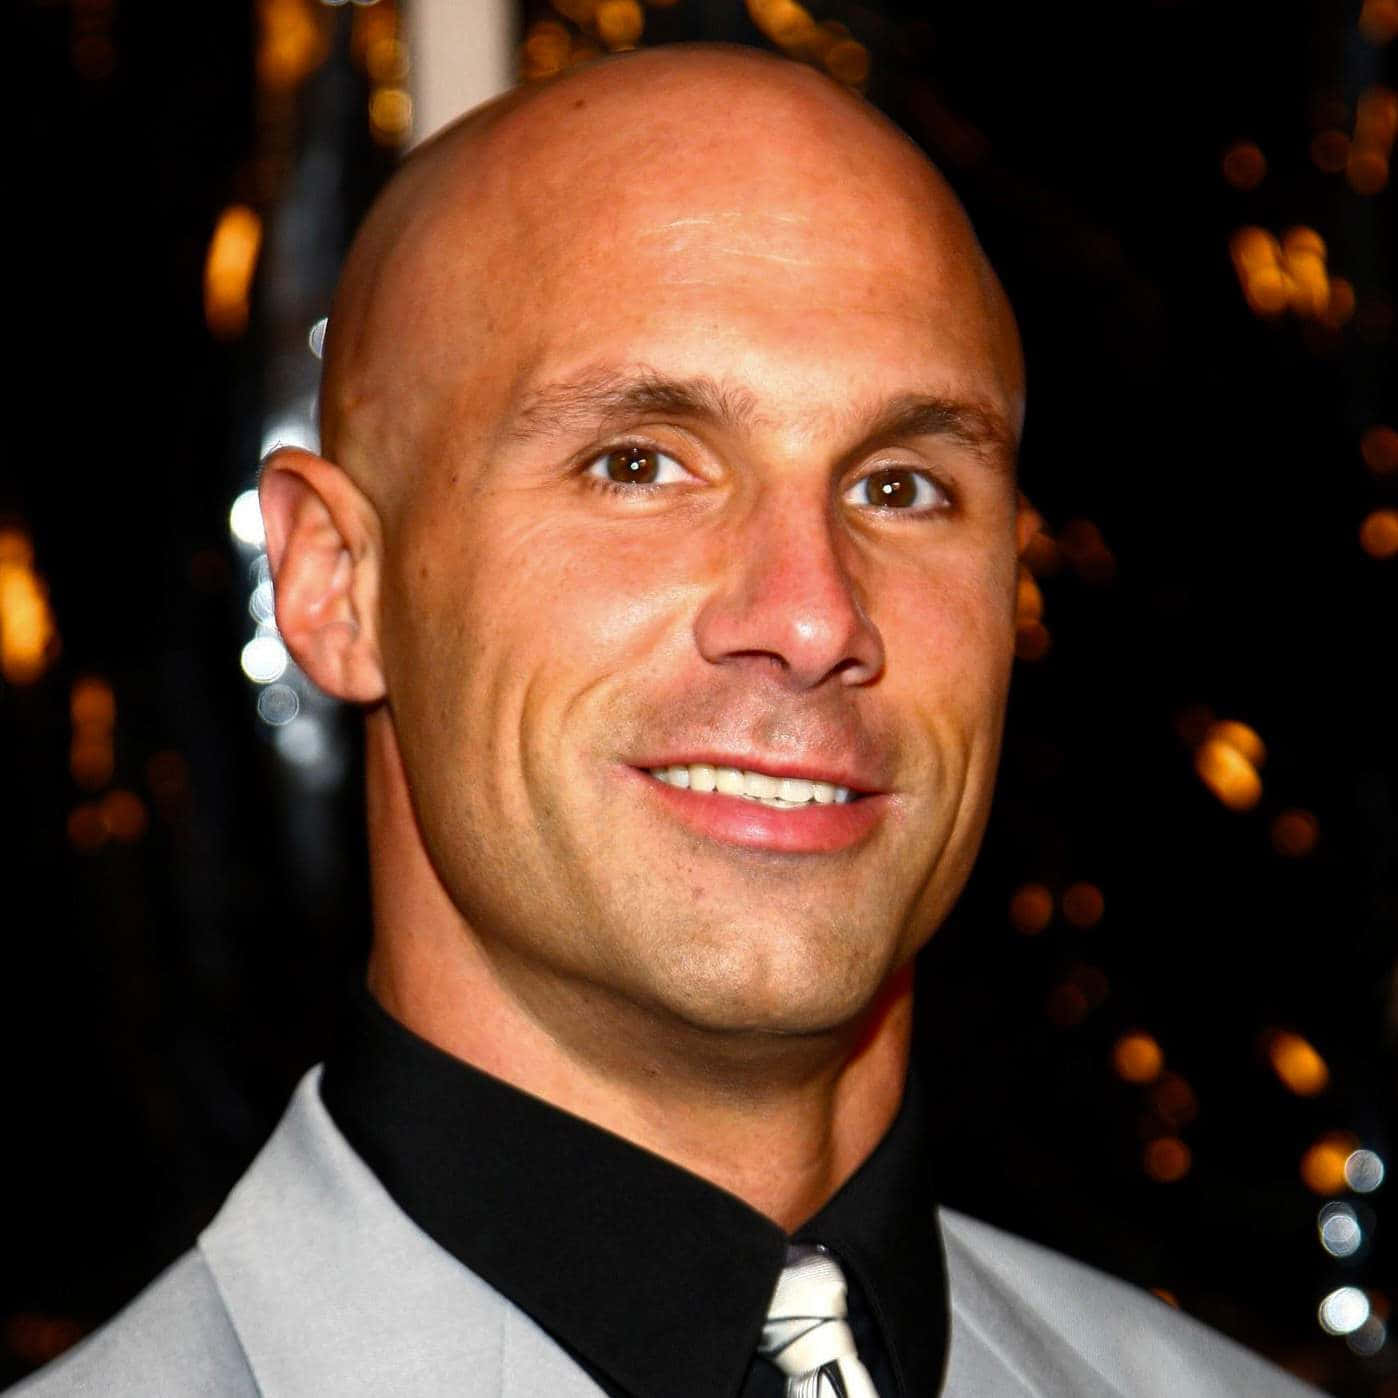 American Aew Wrestler Christopher Daniels Close Up Shot Picture